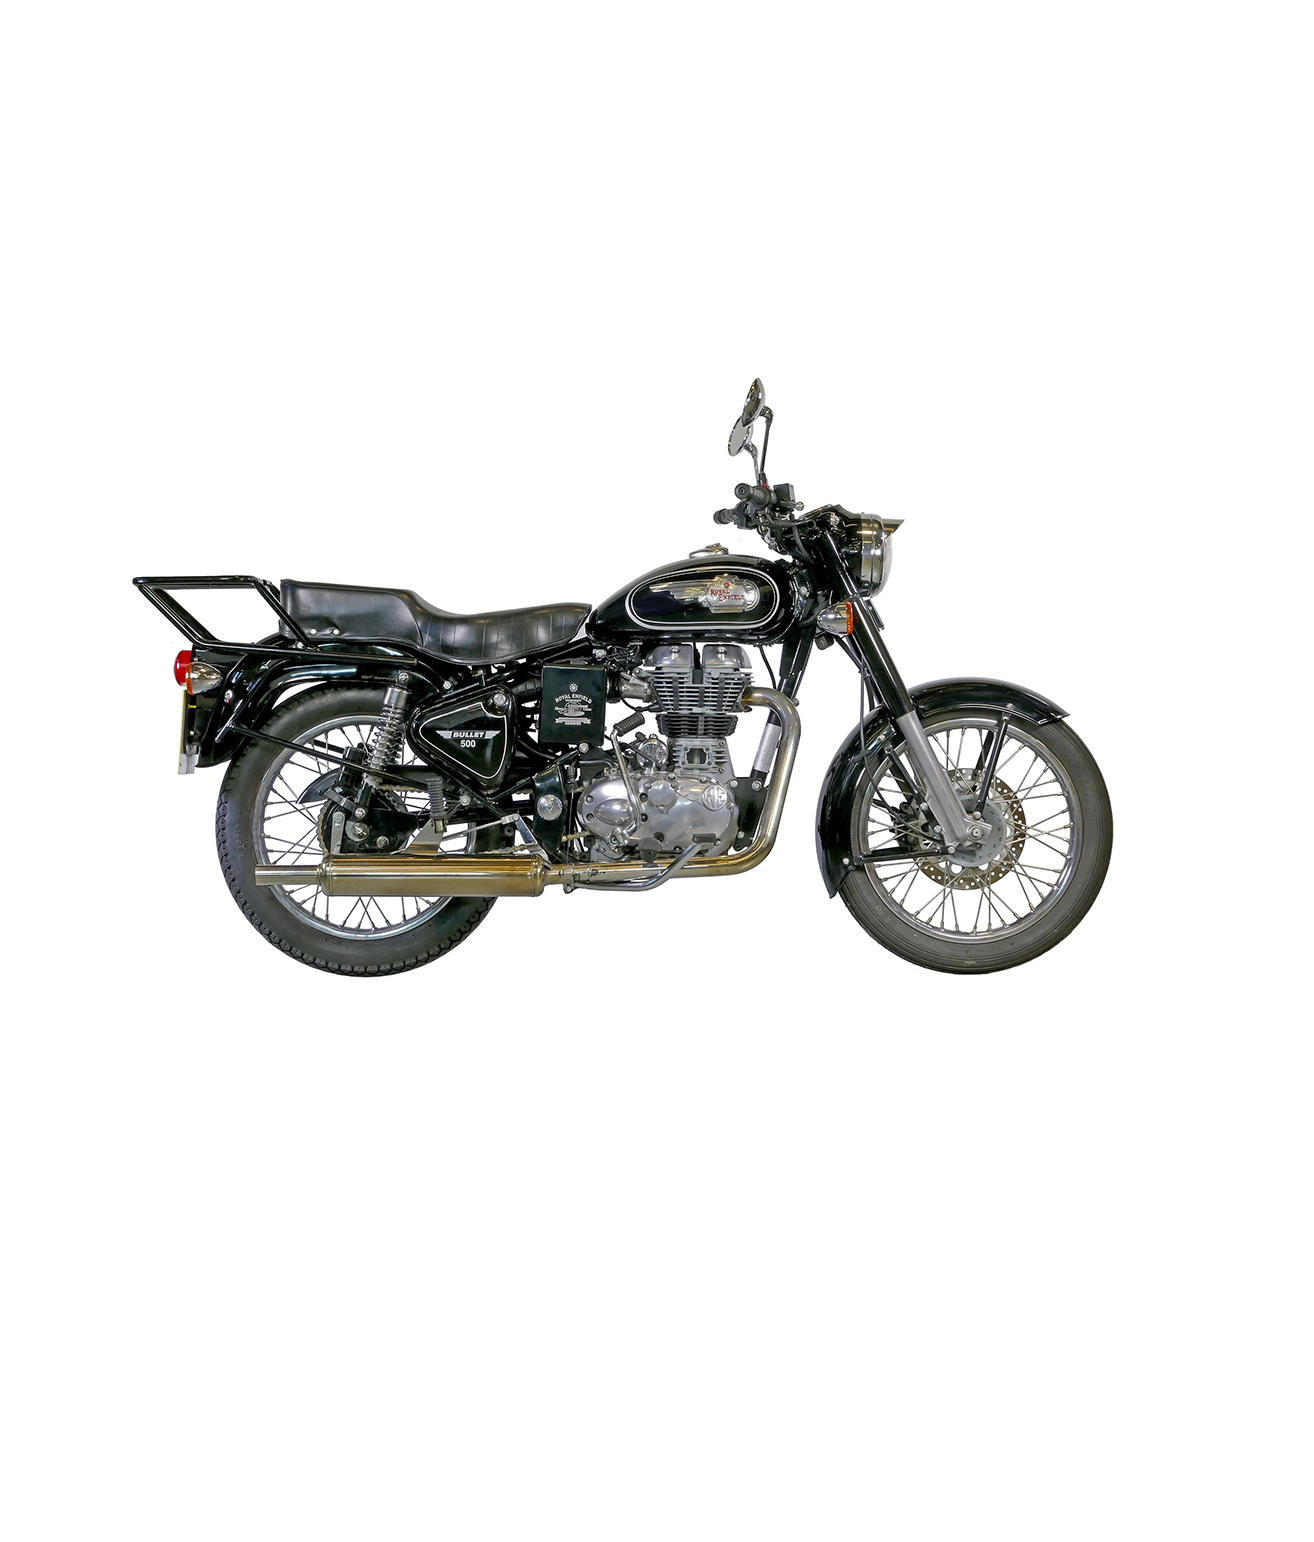 Royal enfield classic 500 problems